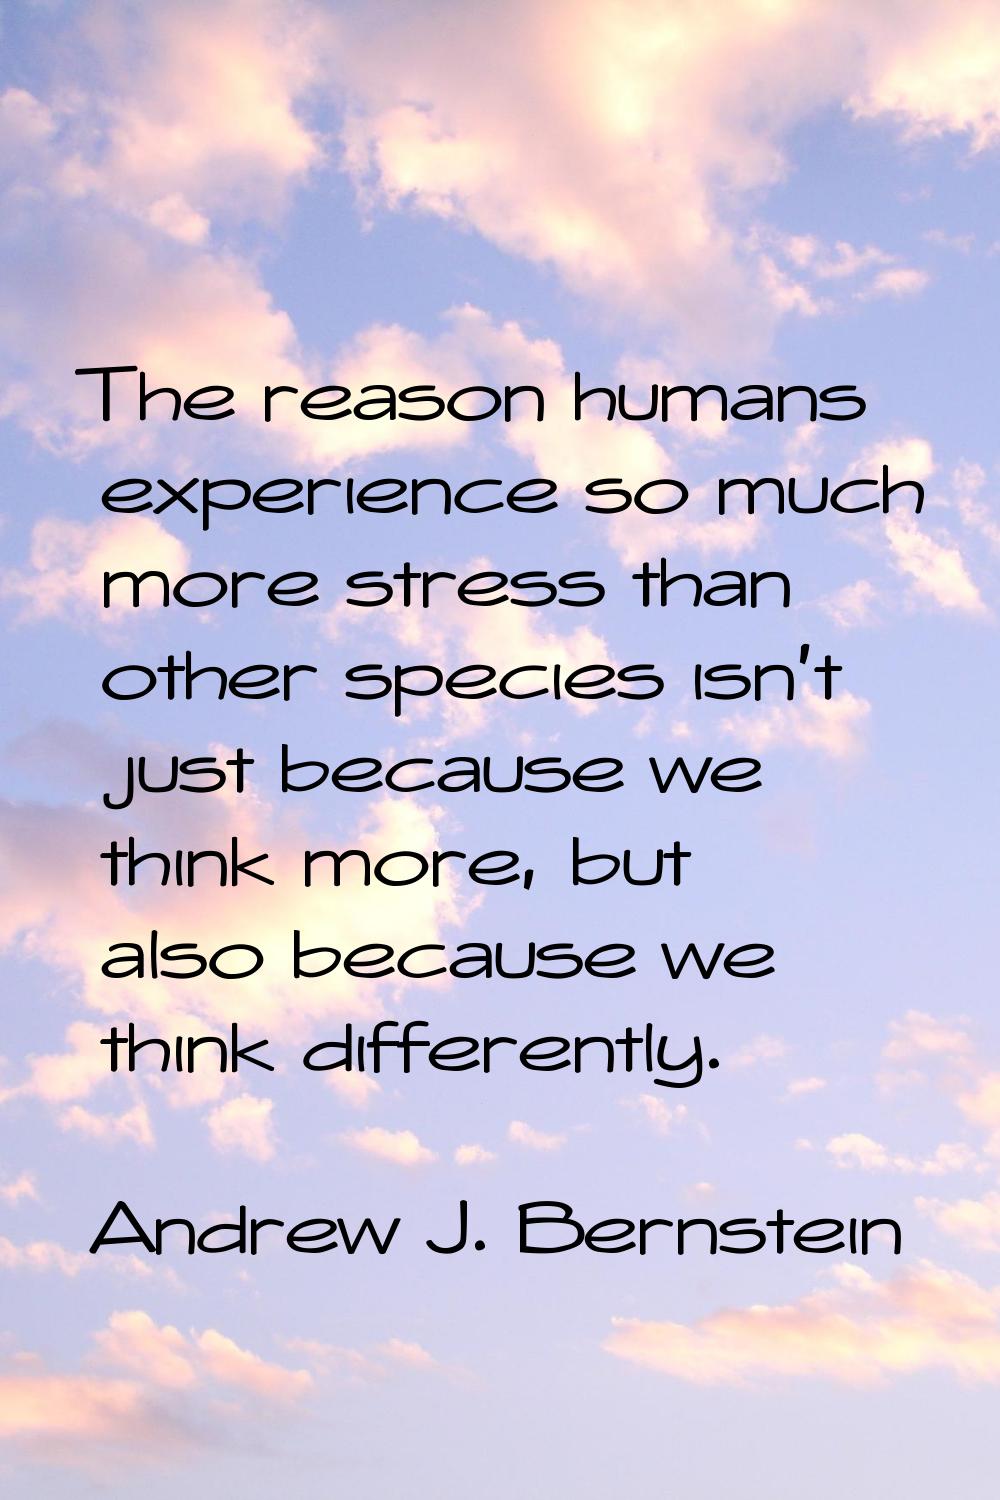 The reason humans experience so much more stress than other species isn't just because we think mor